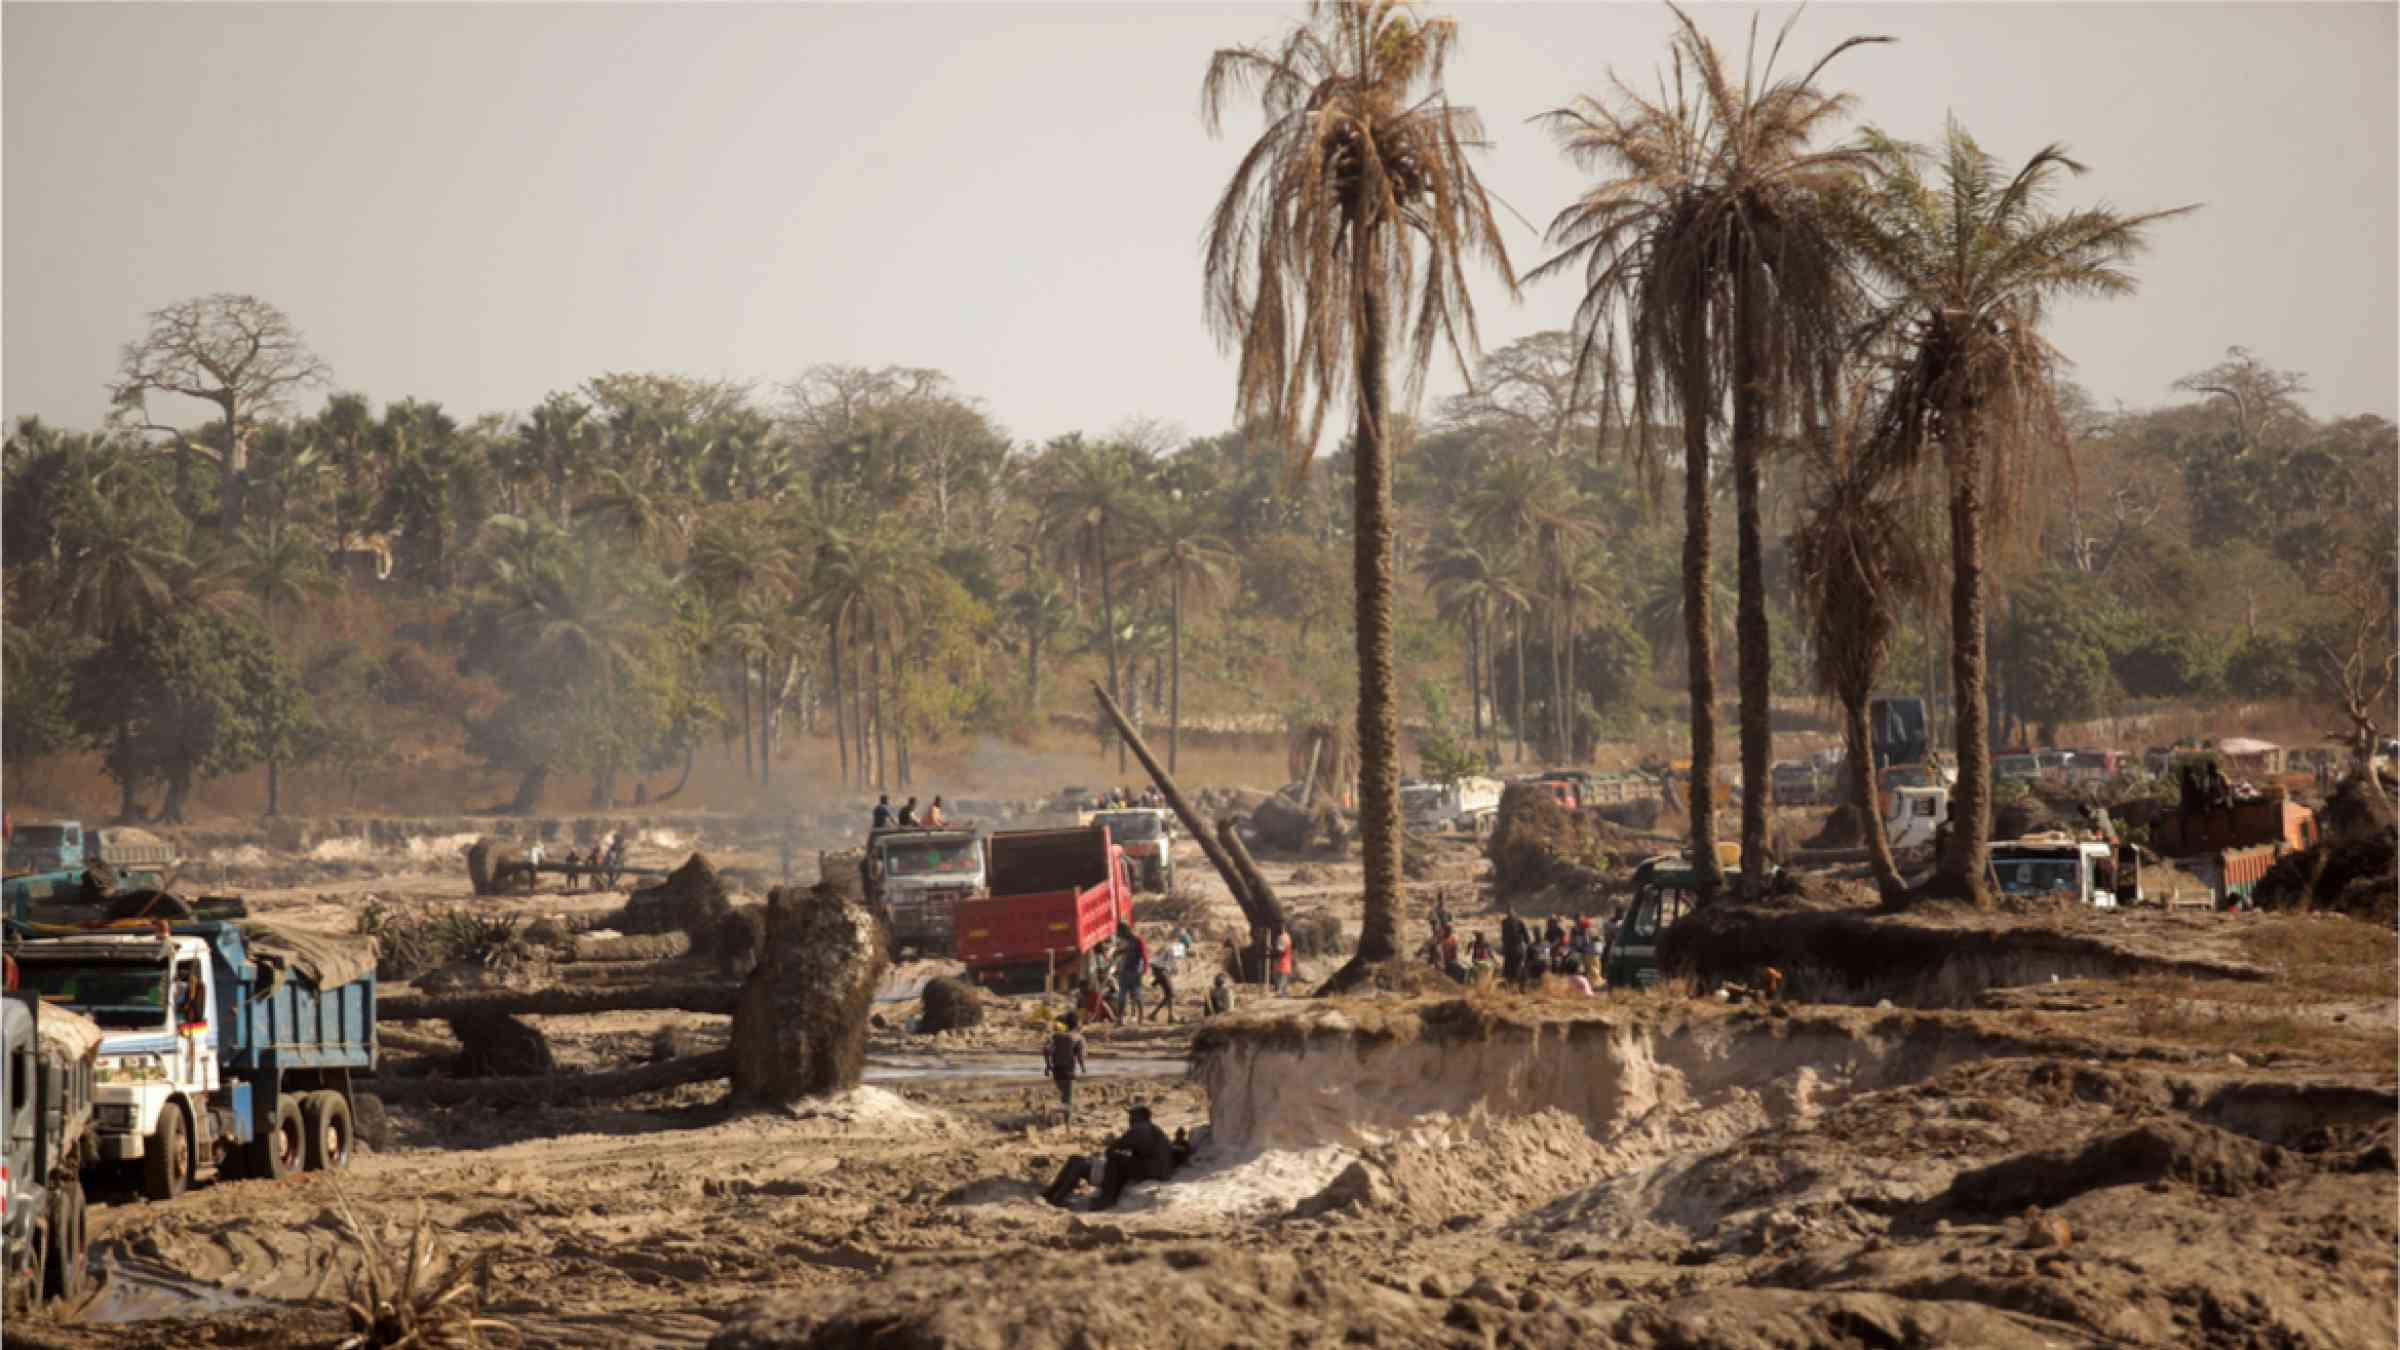 West Africa: Deforestation is causing more storms, finds 30-year